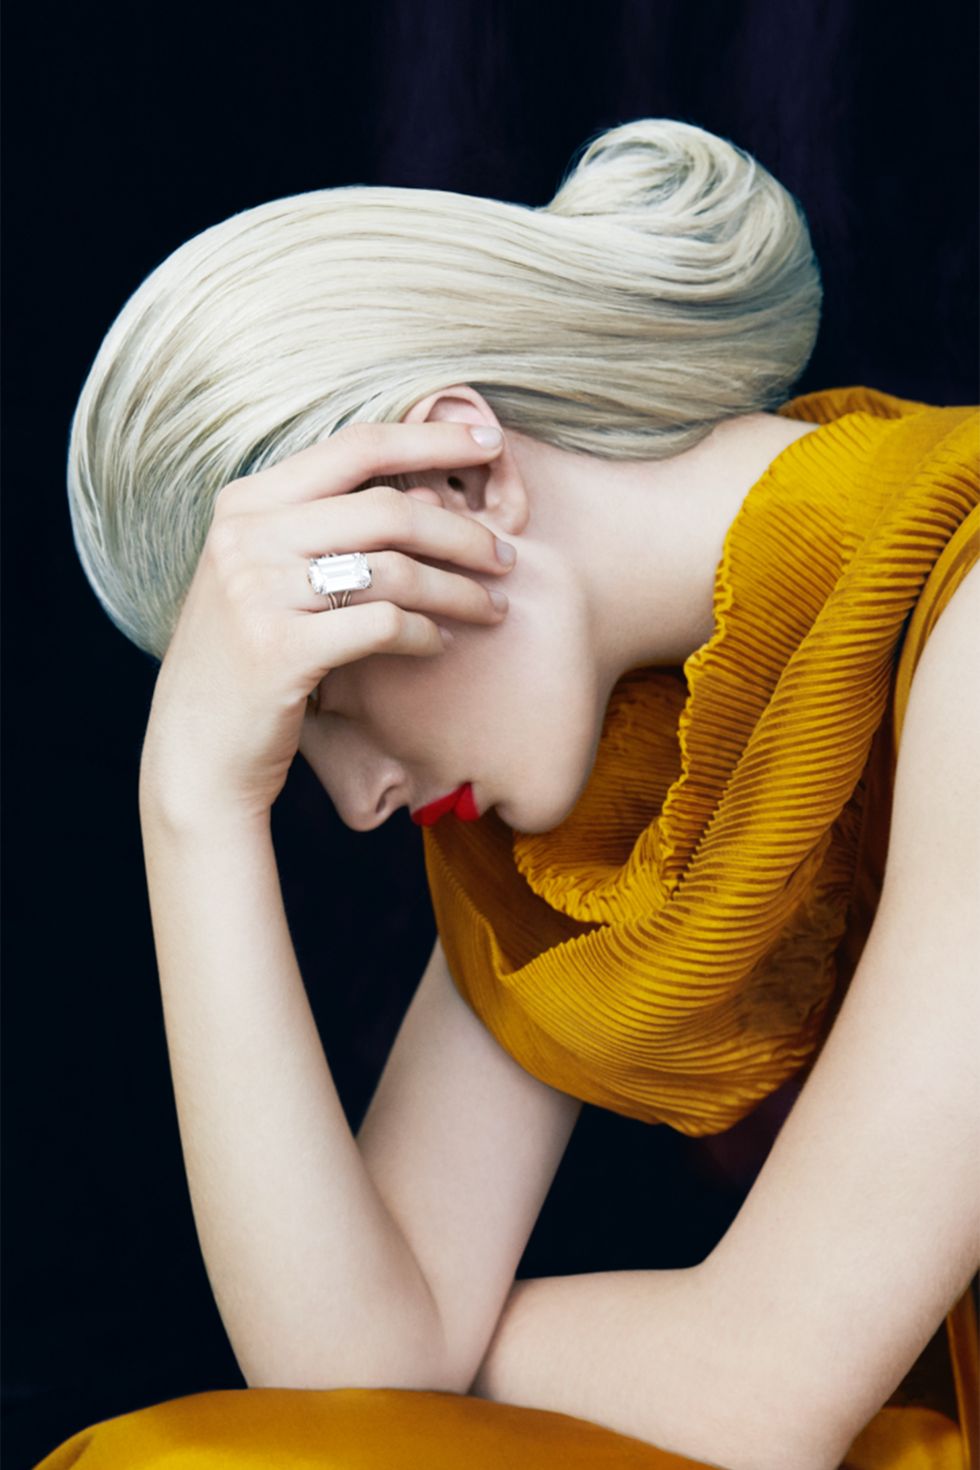 Erik Madigan Heck photography exhibition at Sotheby's